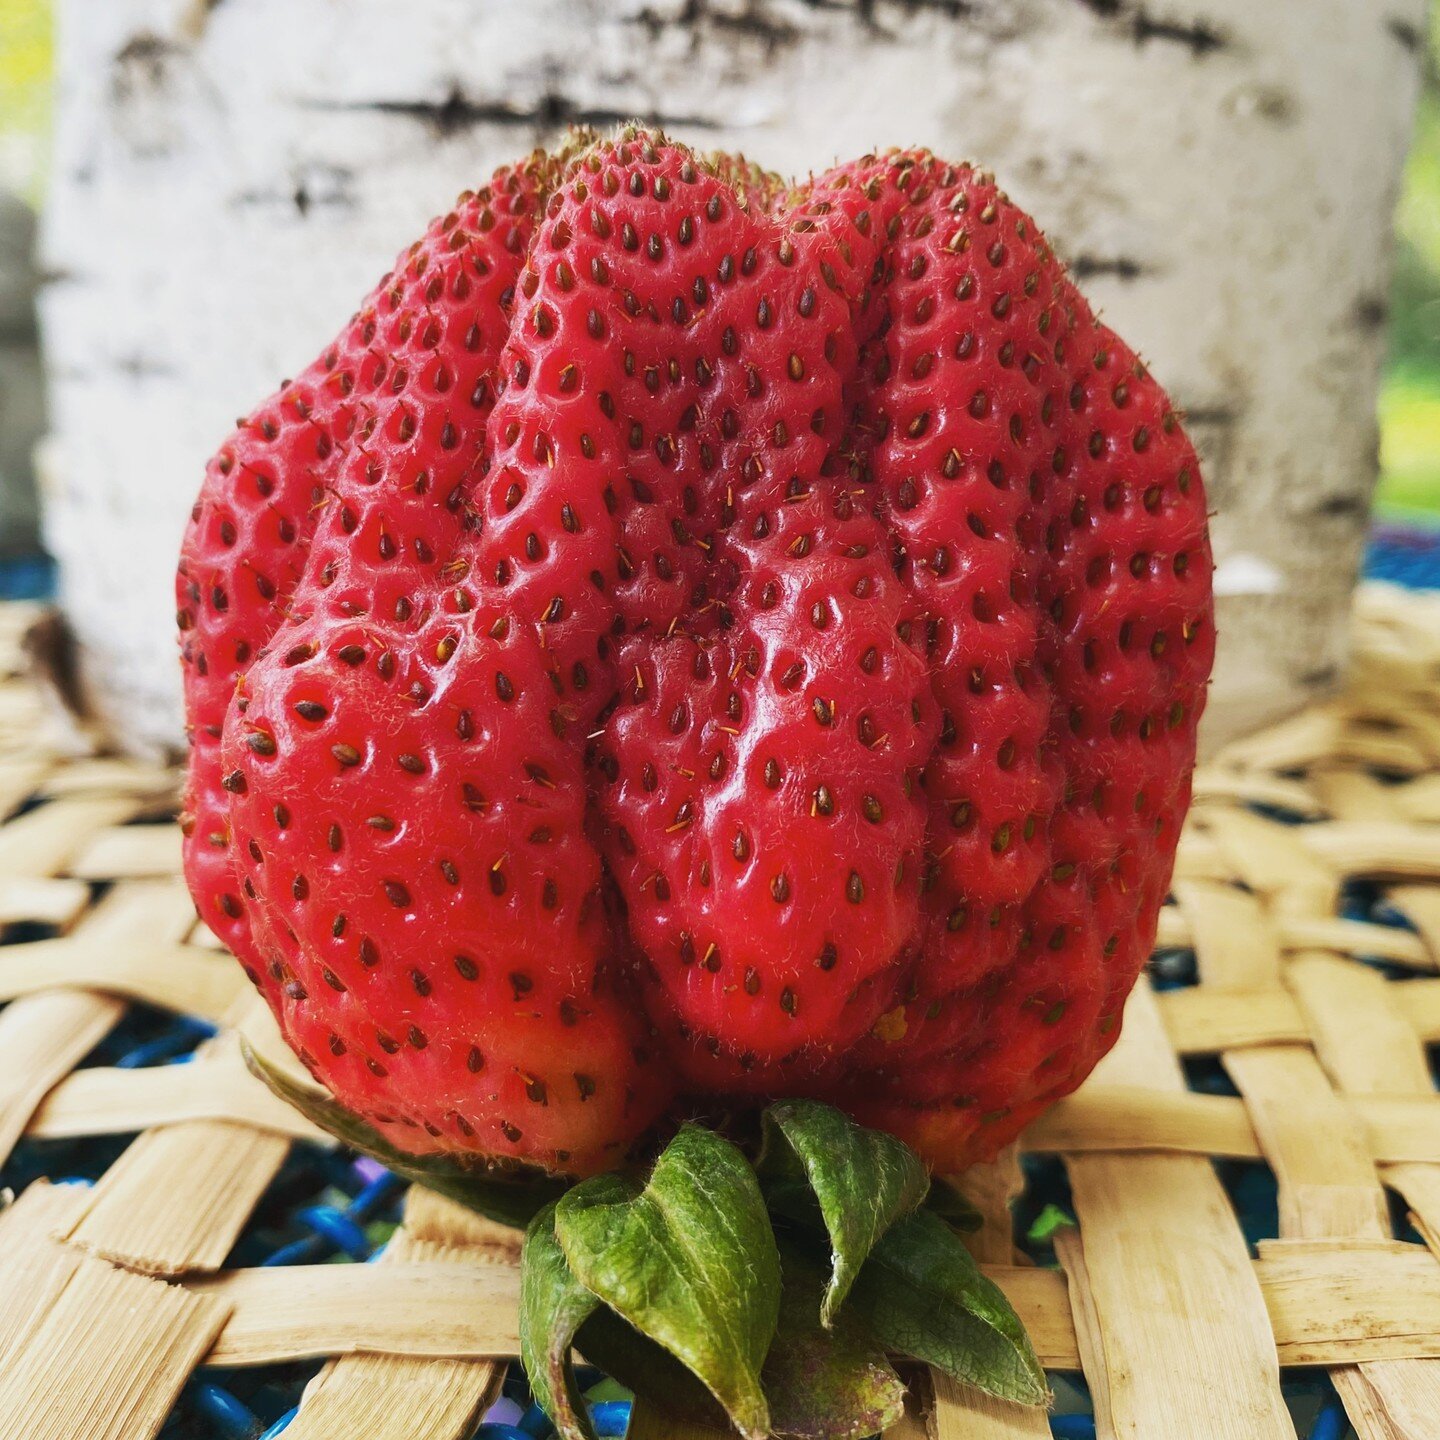 In Traditional Chinese Medicine, STRAWBERRIES have the flavor properties of sweet and sour, they are cooling in nature, and nourishing to the YIN. 

Strawberries clear heat and generate fluids, and as such they are beneficial for dry cough, hot flash